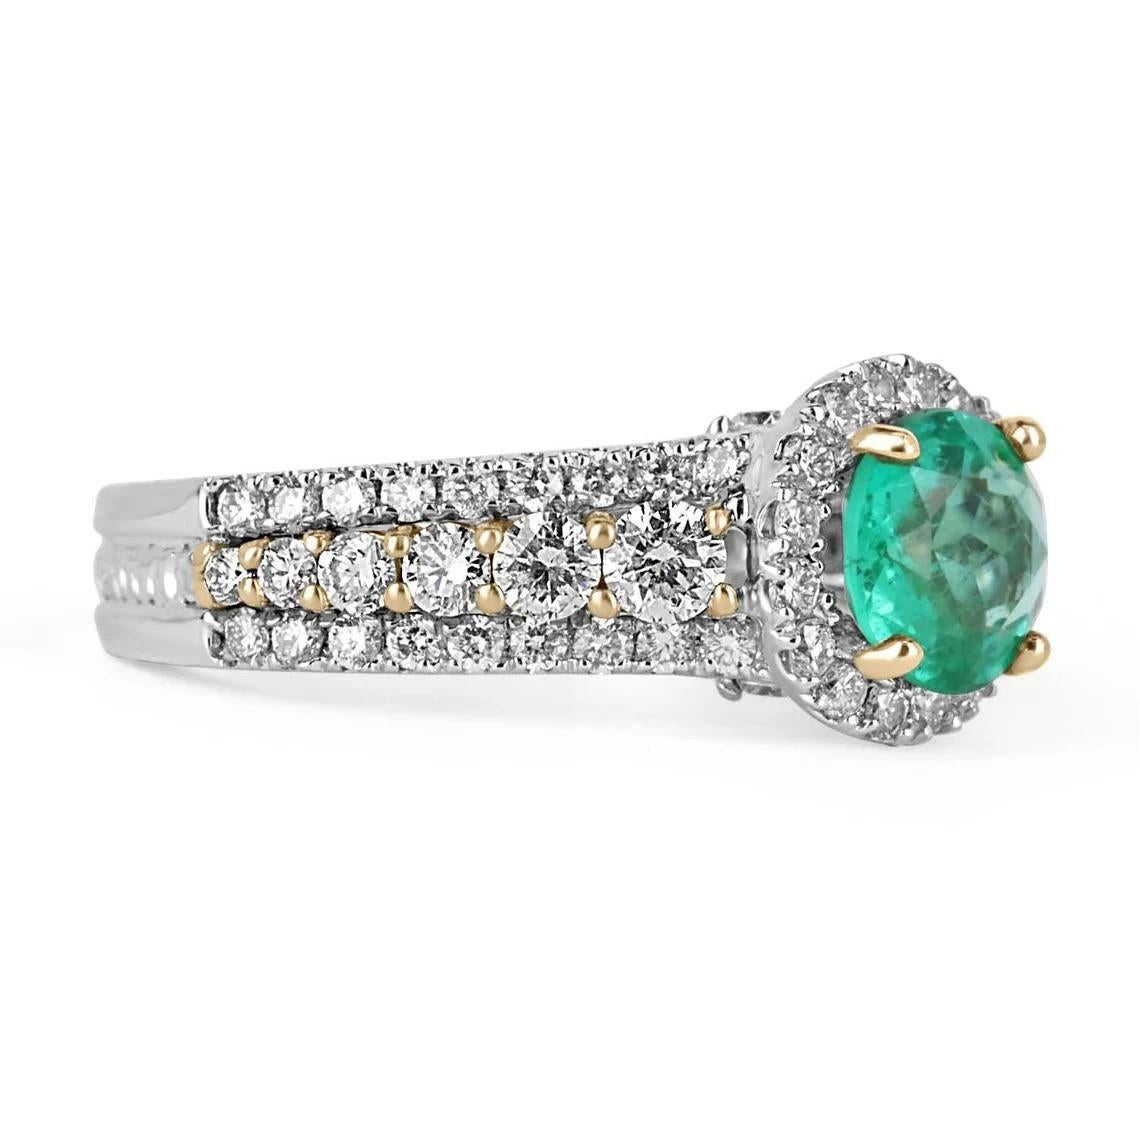 Color and brilliance can best describe this rare round Colombian emerald and diamond engagement ring 14K. The luminous, round, medium green Colombian emerald has amazing qualities that make it exclusive. The emerald is set in a secure four-prong